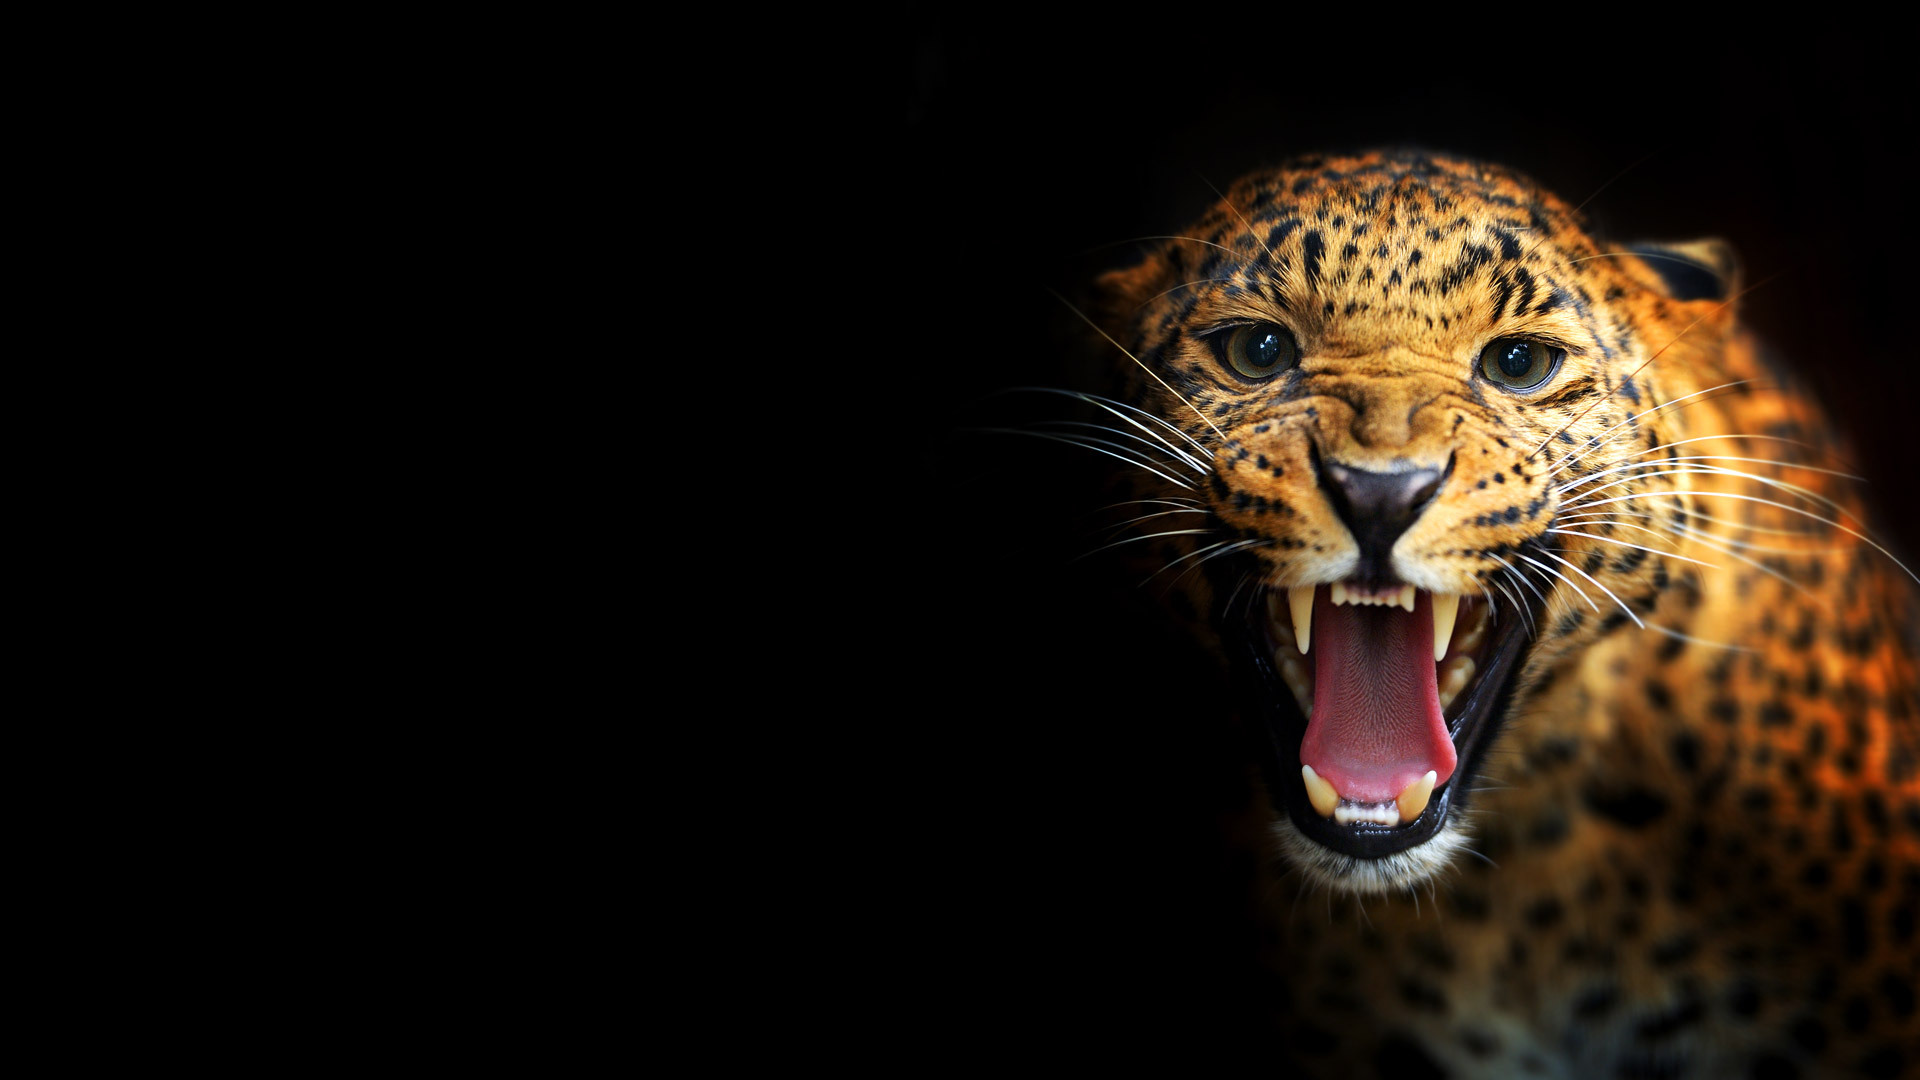 Leopard on a black background wallpapers and images   wallpapers